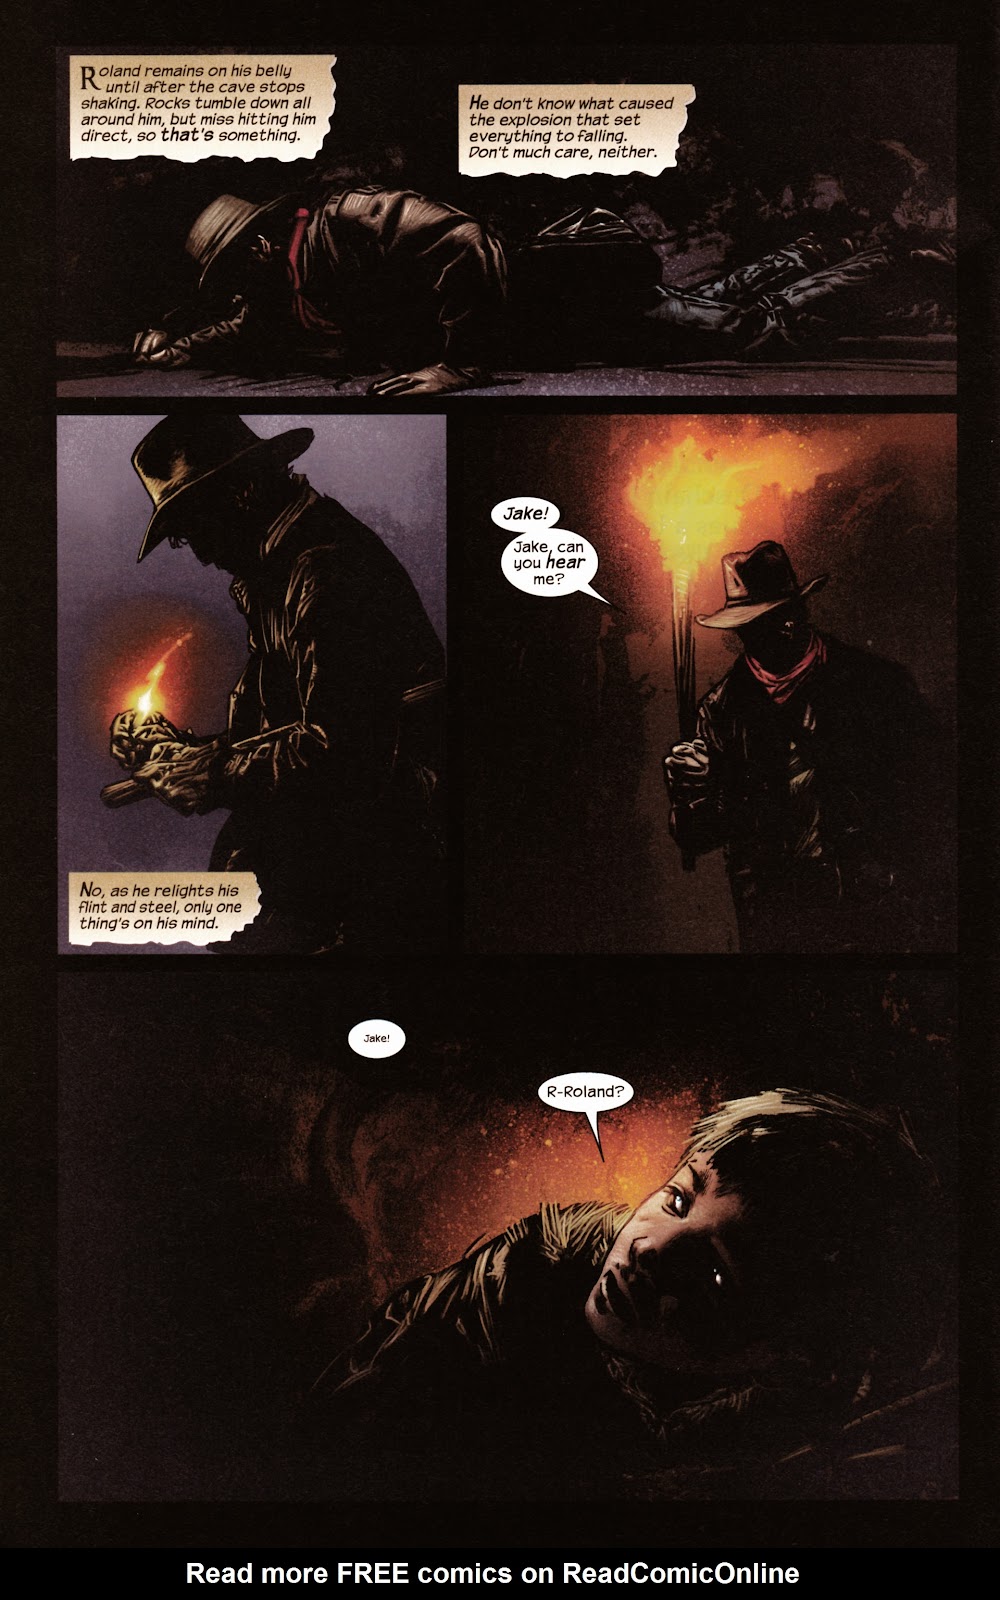 Dark Tower: The Gunslinger - The Man in Black issue 2 - Page 3